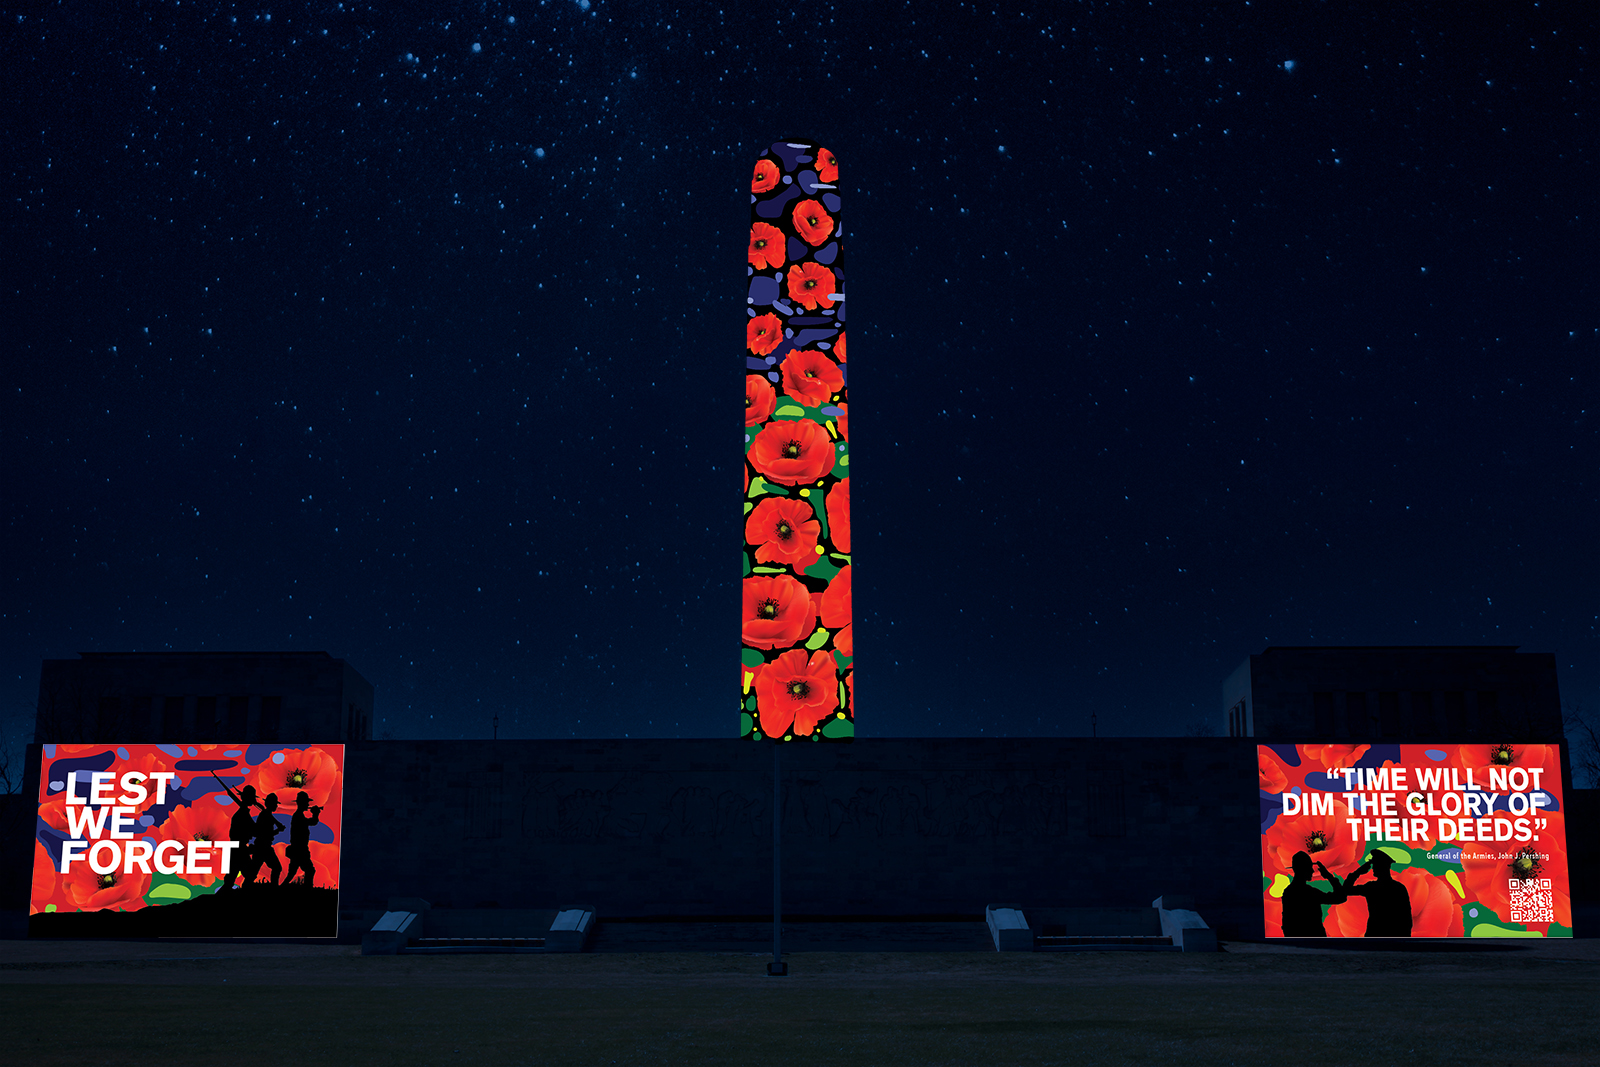 Digital rendering of the Liberty Memorial Tower and North Wall at night. Poppy graphics are projected onto the tower. Left of the tower, a graphic with the text 'Lest We Forget' is projected on the North Wall. To the right of the Tower, a graphic with the text 'Time will not Dim the Glory of their Deeds' is projected onto the North Wall.